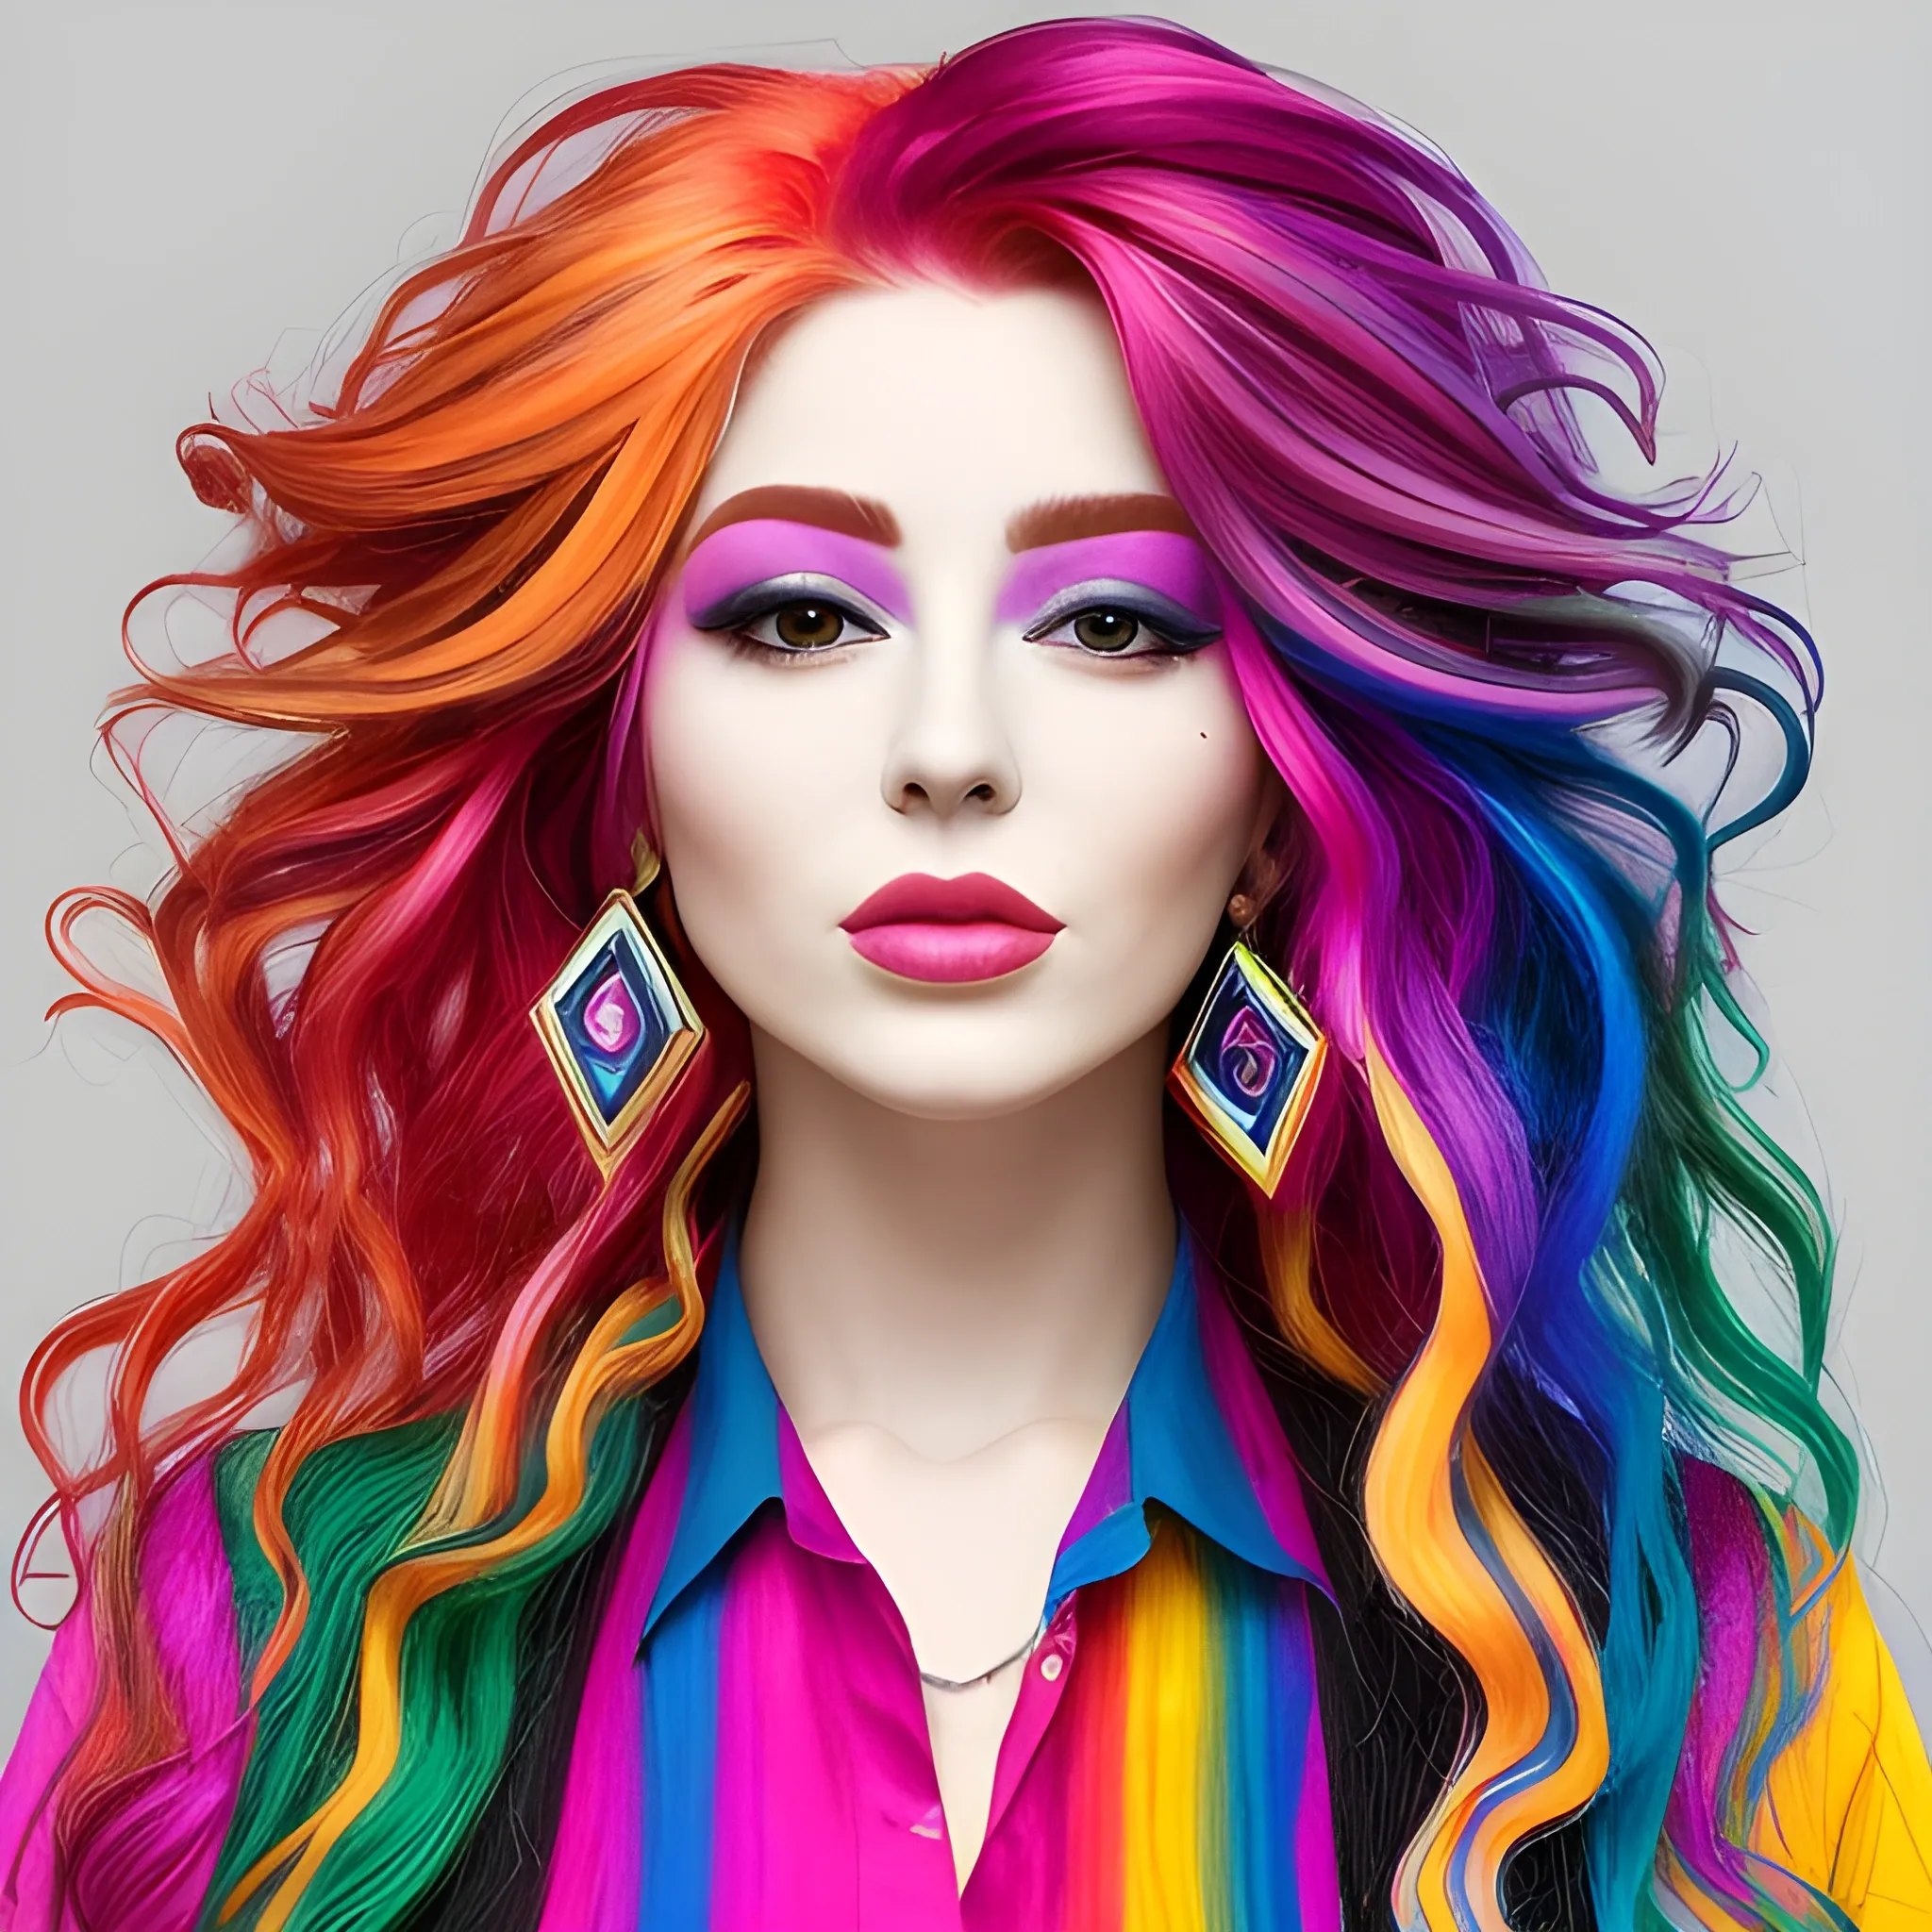 the woman is wearing multicolored hair, vibrant color scheme - Arthub.ai